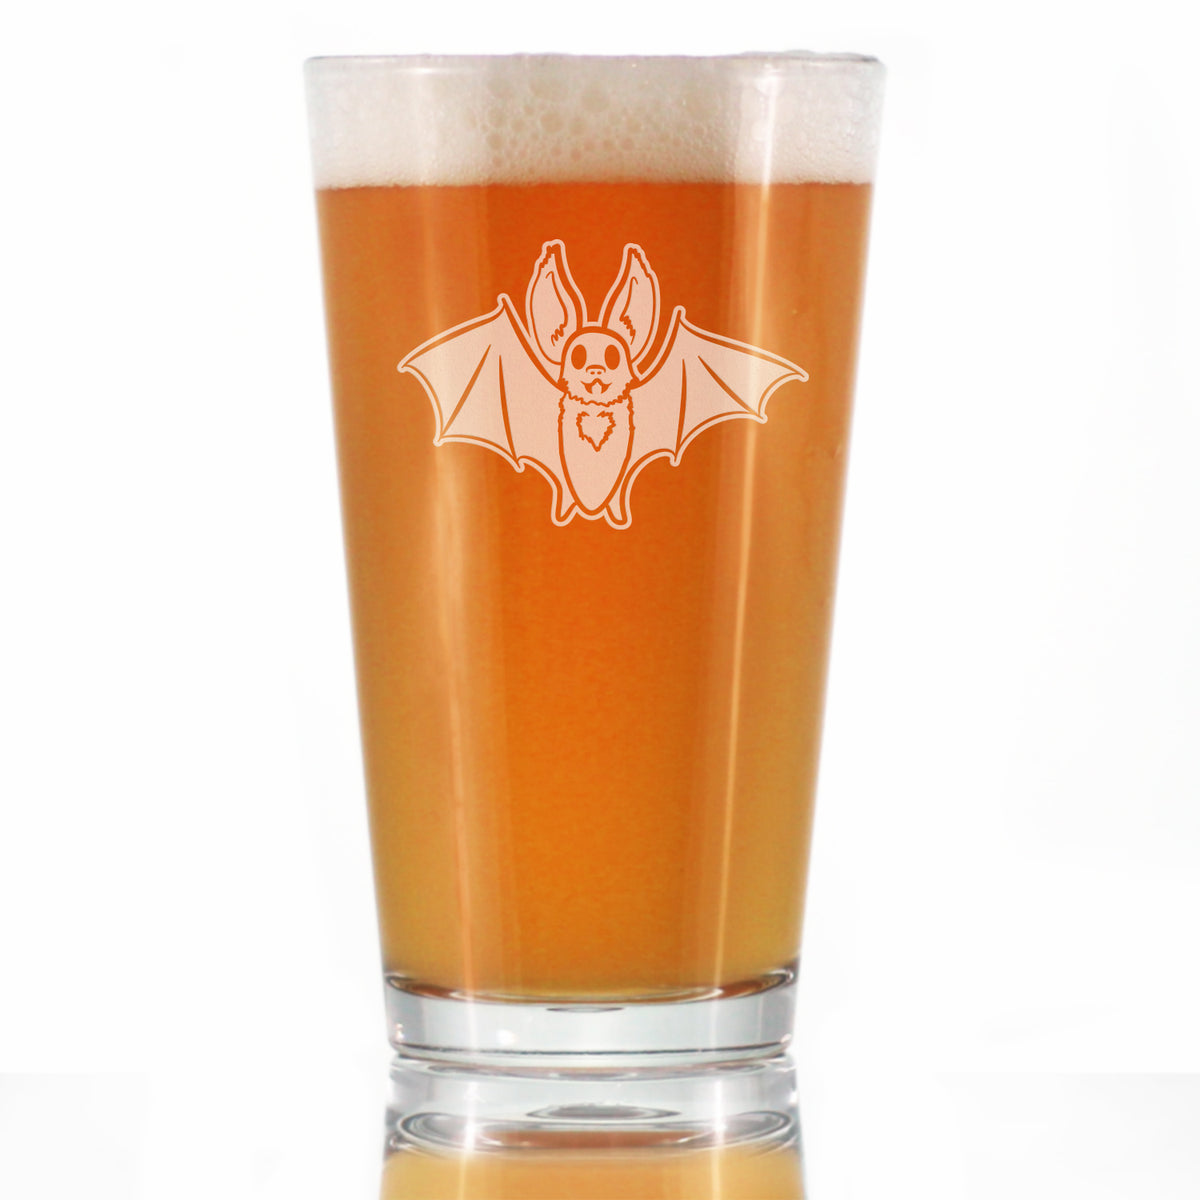 Bat Pint Glass for Beer - Funny Cute Bat Gifts - Spooky Fun Halloween Decor with Bats - 16 oz Glasses